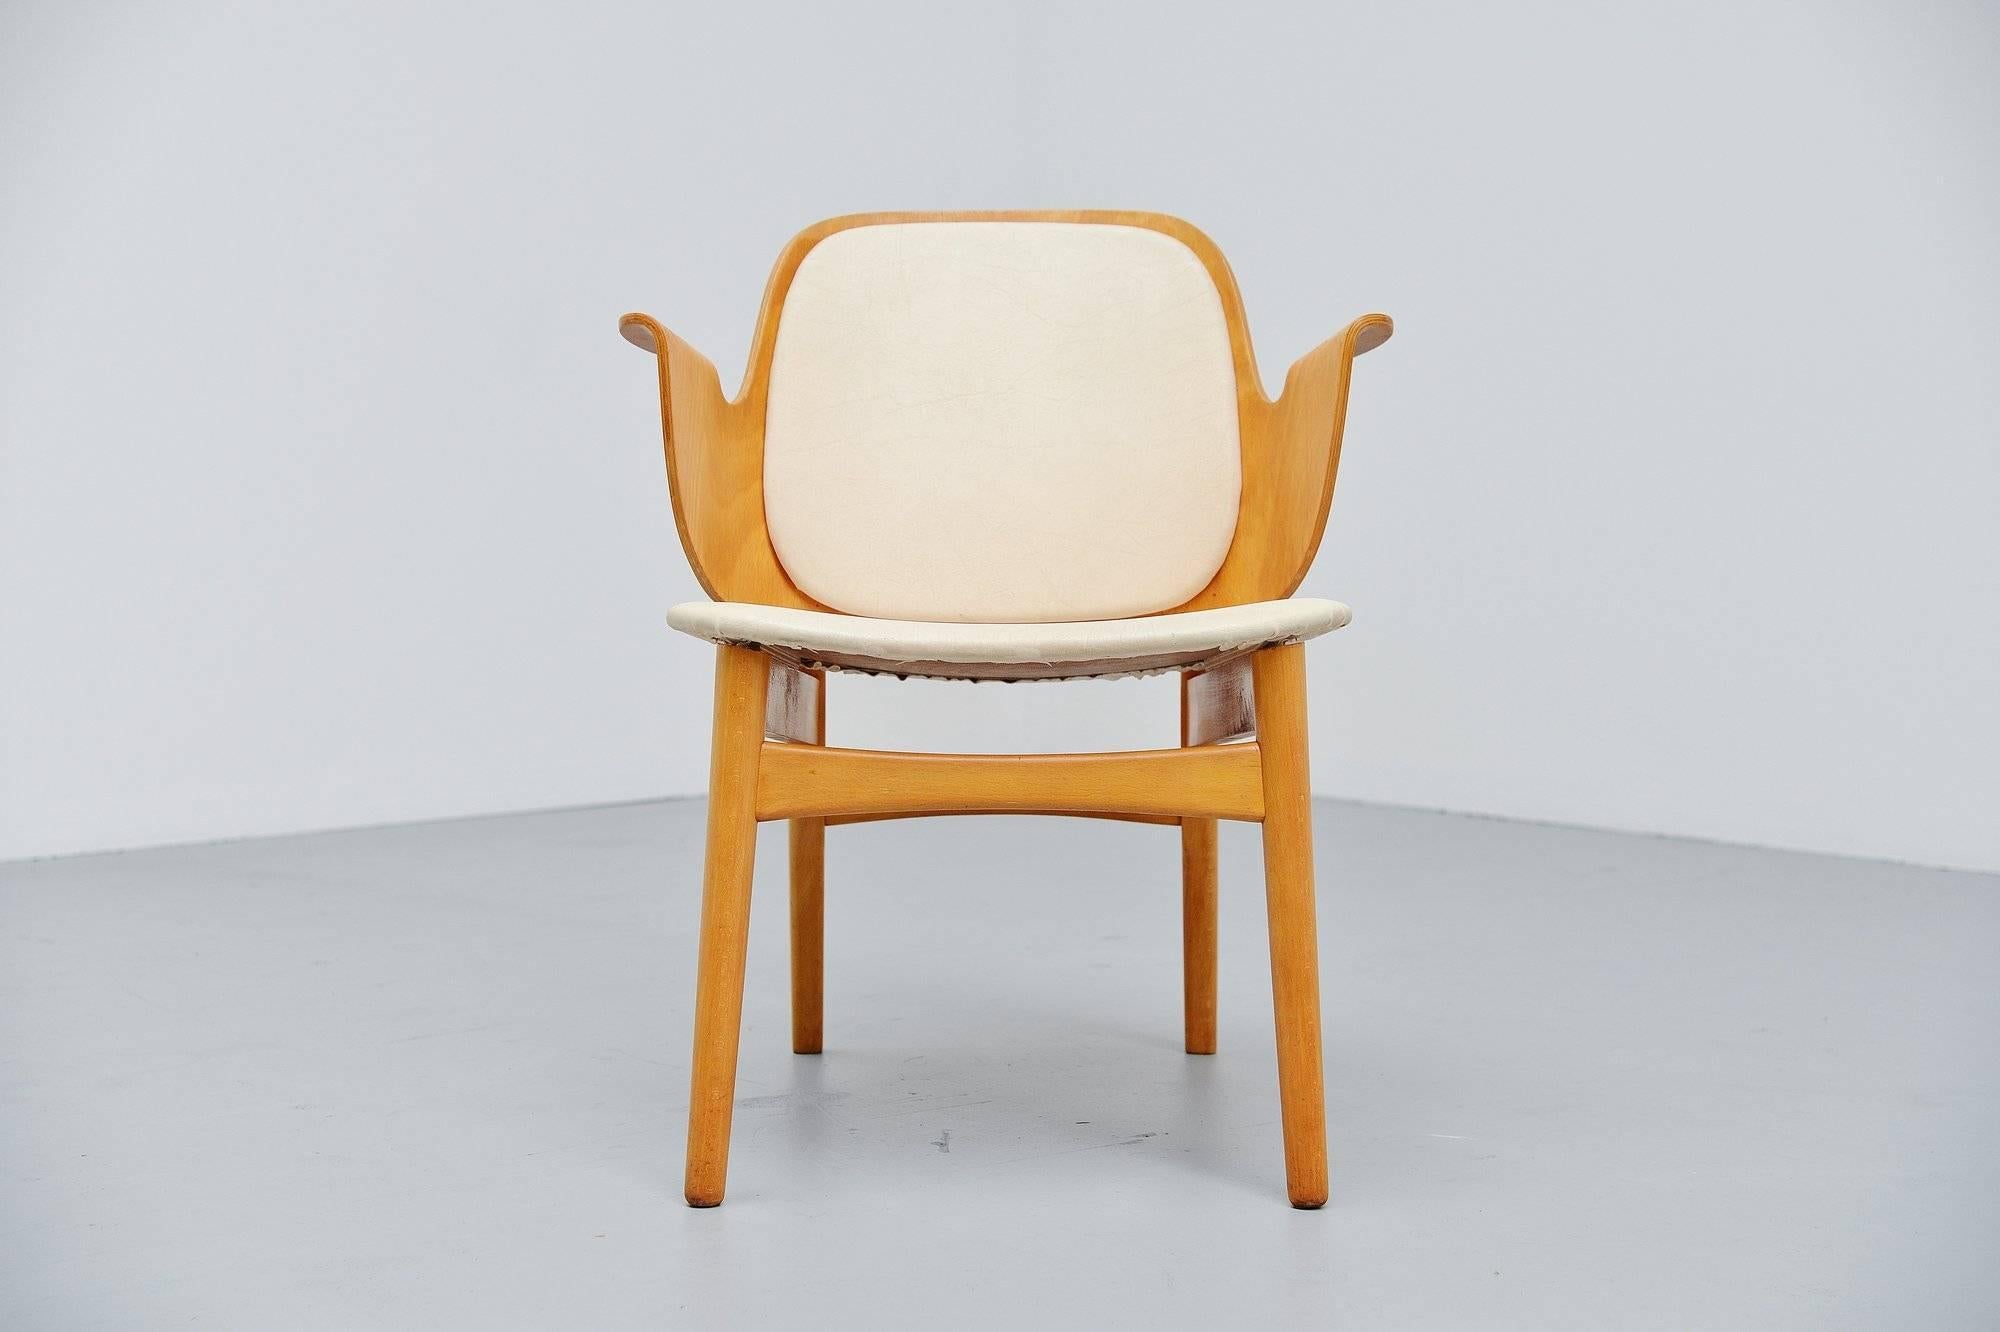 Very nice birch plywood lounge chair model 107 designed by Hans Olsen for Bramin, Denmark, 1950. The chair is made of solid birch (ply)wood and has a white faux leather seat and back. The chair is in remarkable original condition and has a very nice